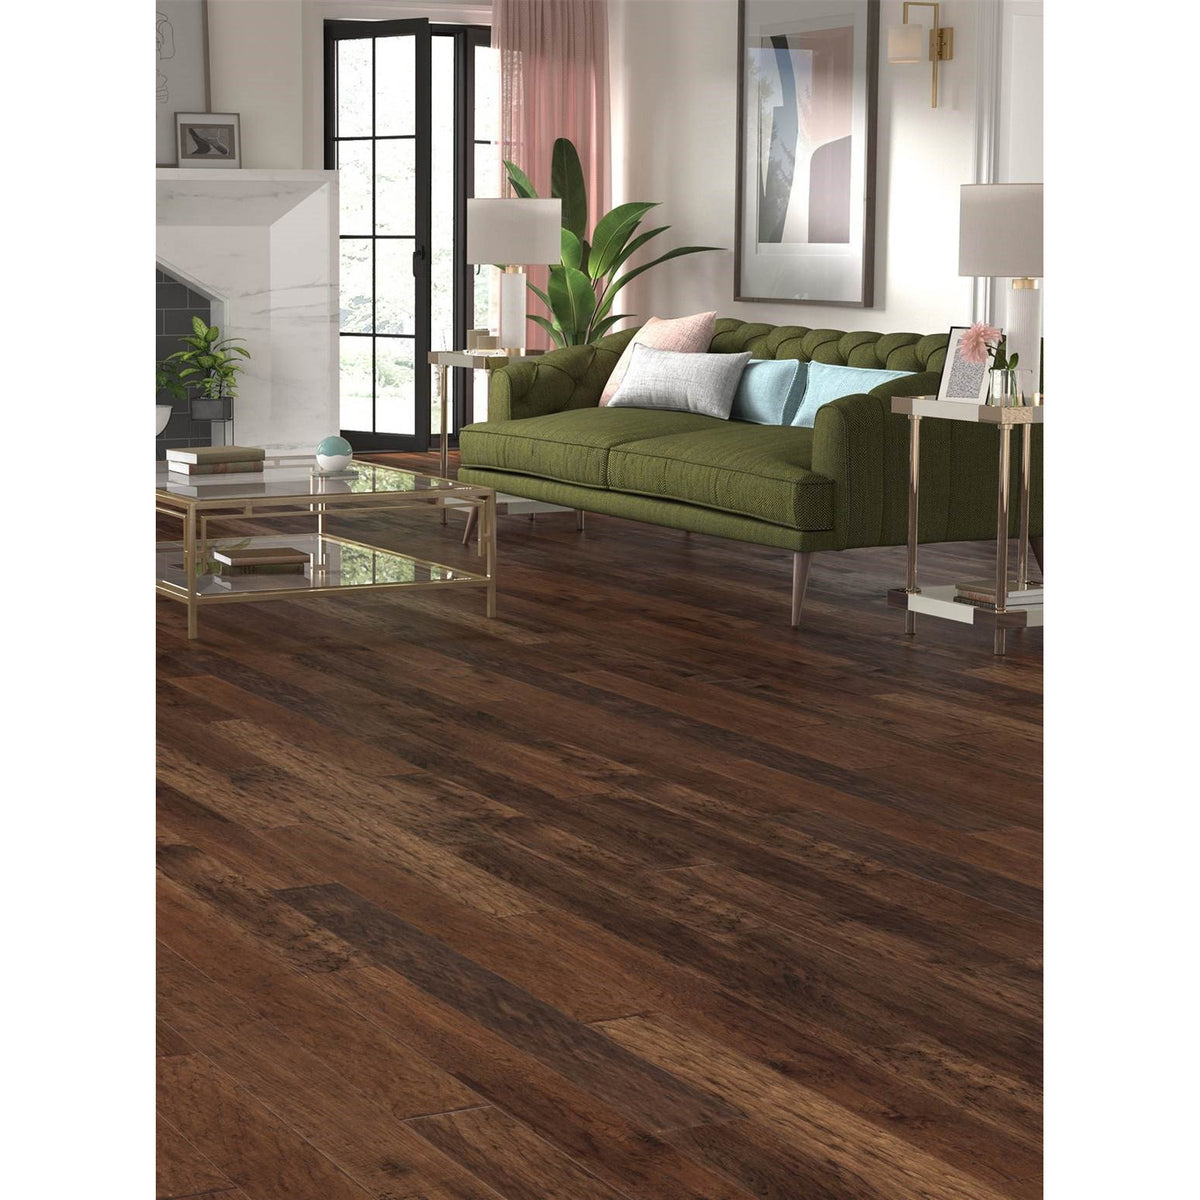 LM Flooring - River Ranch Collection - Almond Hickory Room Scene